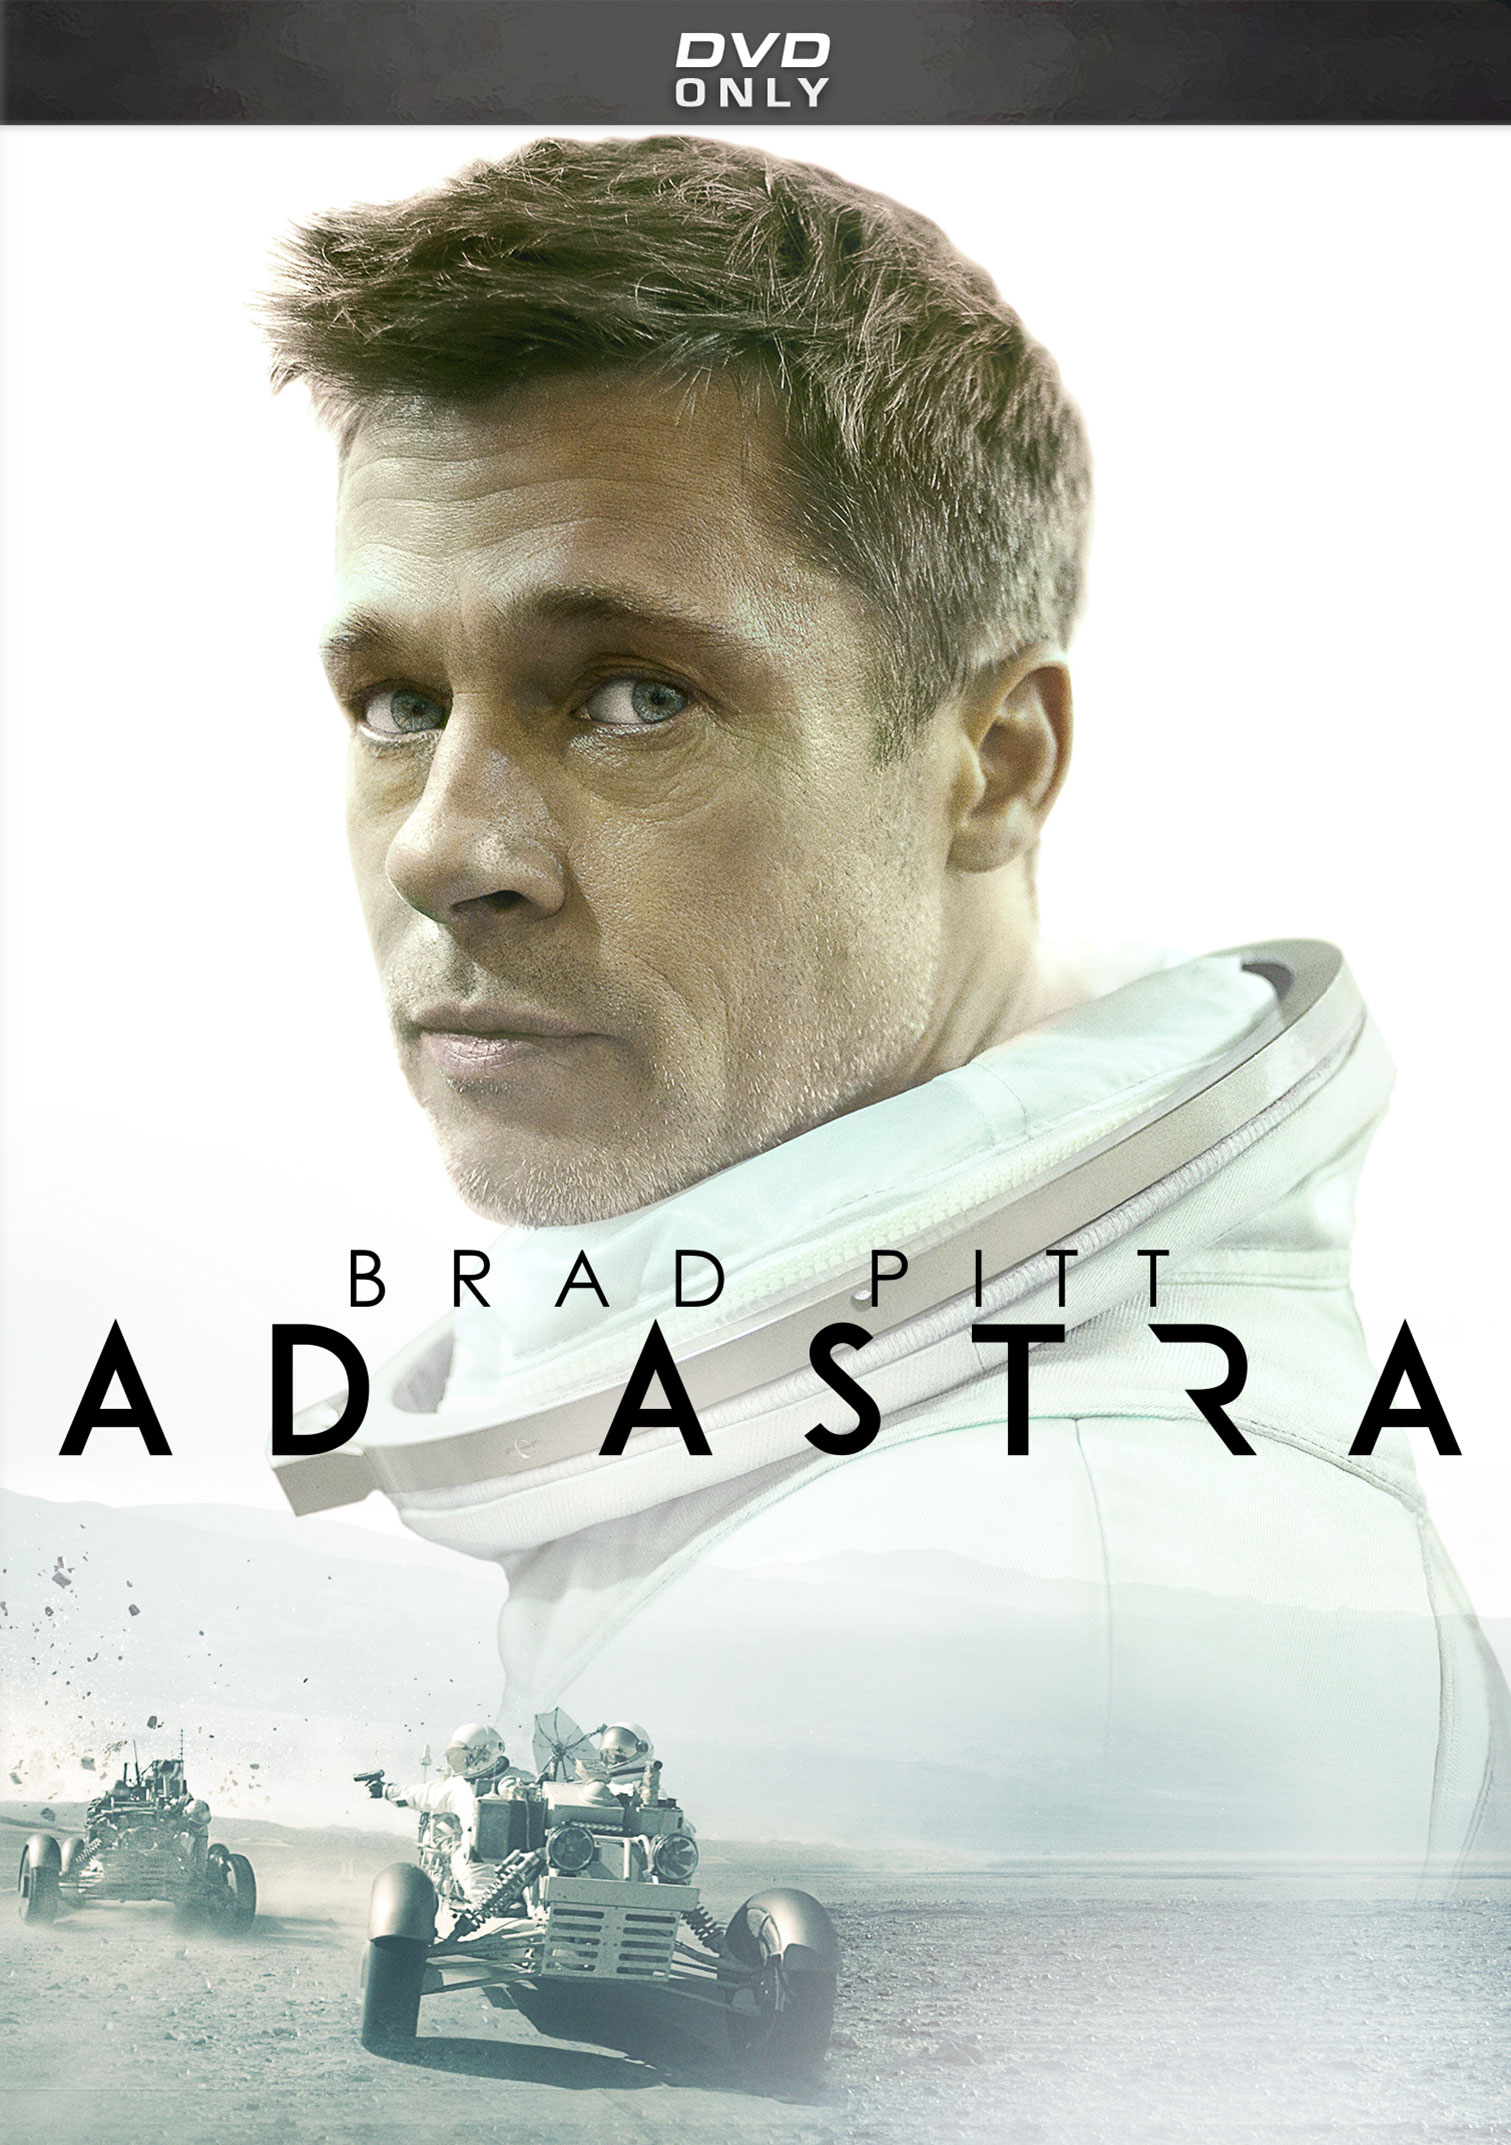 Ad Astra 2019 Full Movie Online In Hd Quality